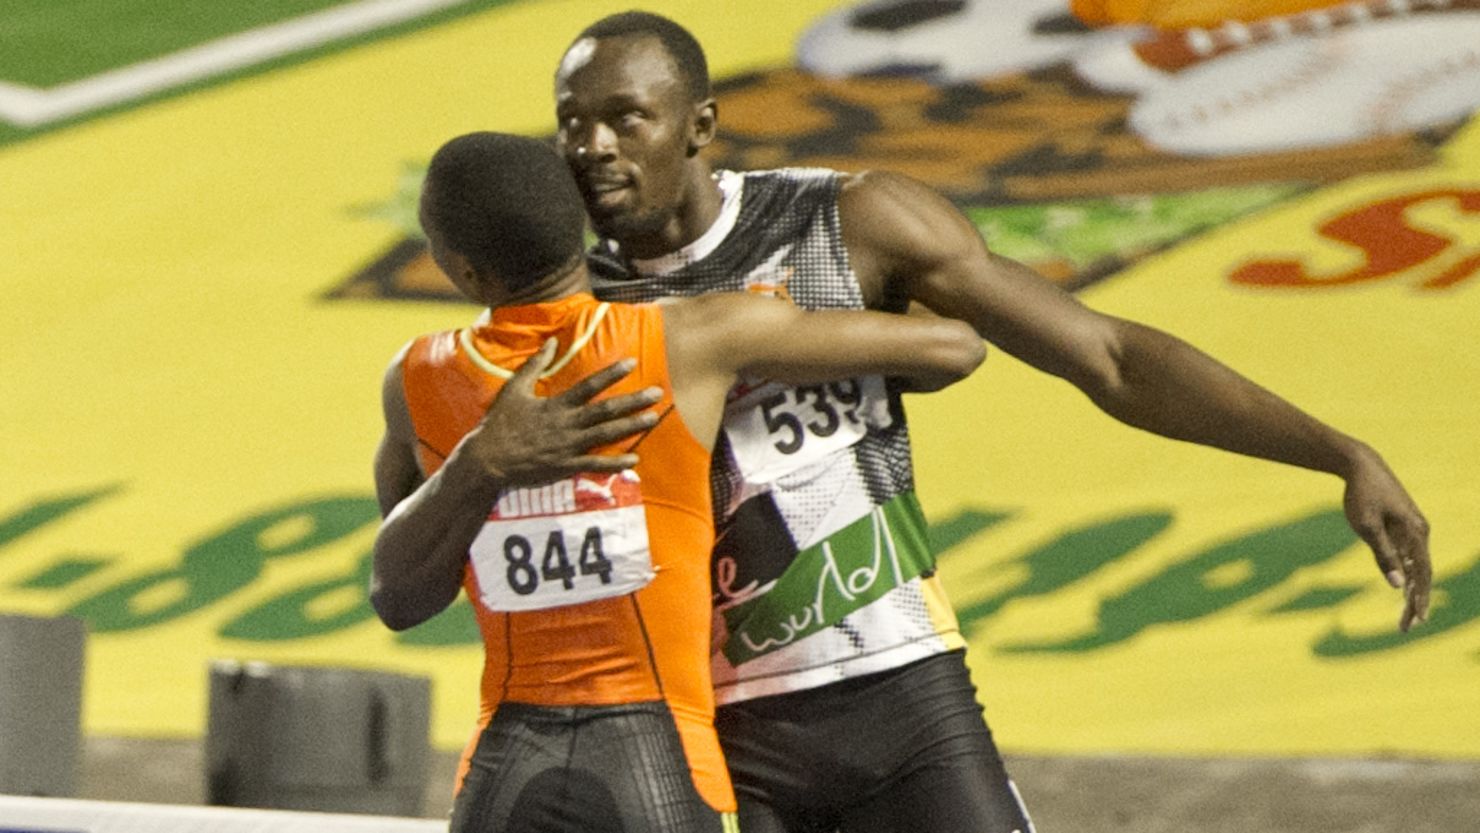 Sprinters Usain Bolt and Yohan Blake embrace after the latter clinched 200m victory at the Jamaican trials.